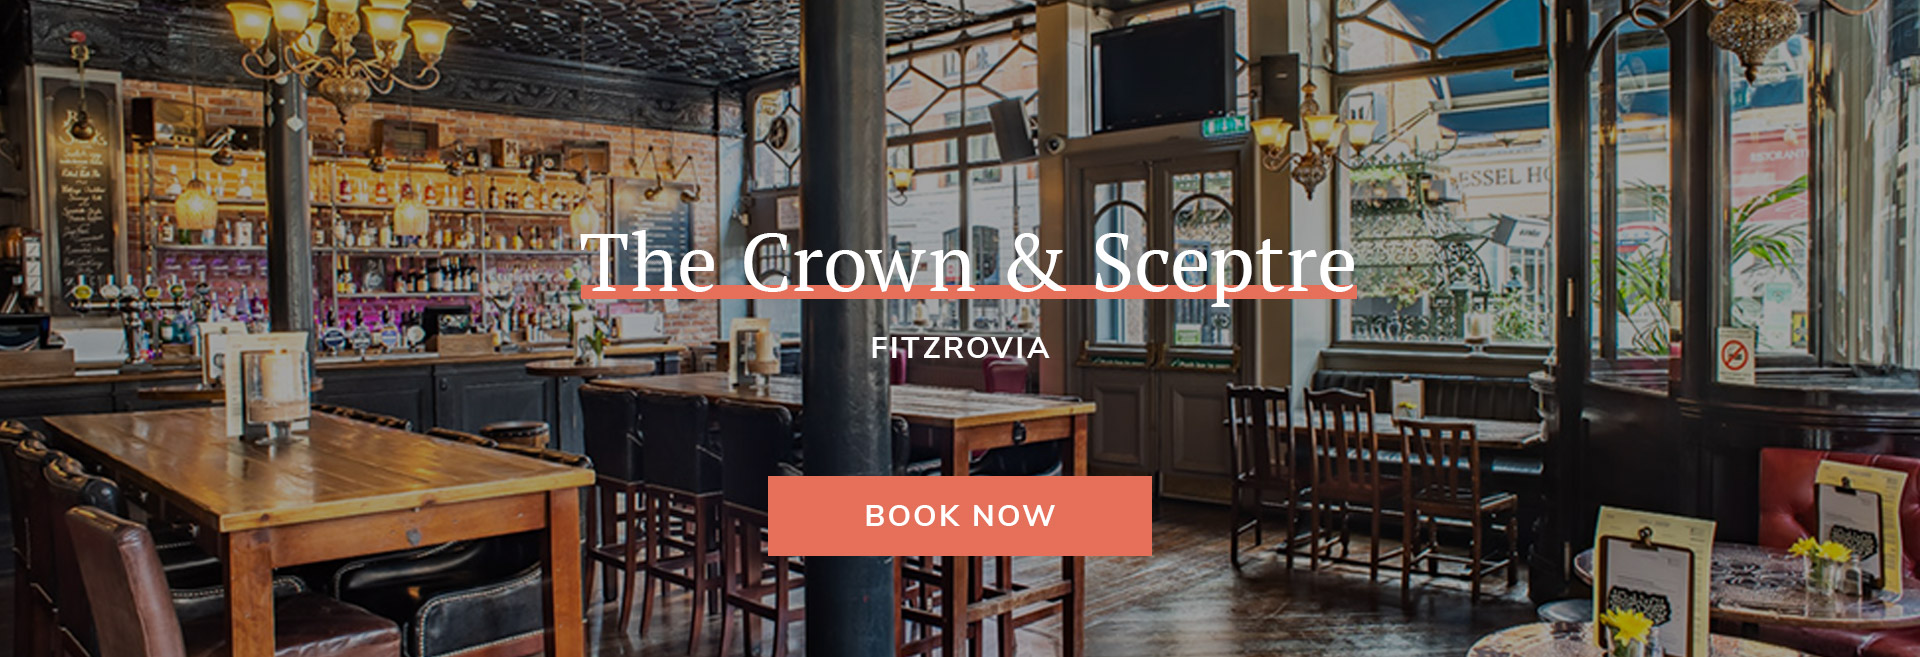 The Crown & Sceptre Banner 2